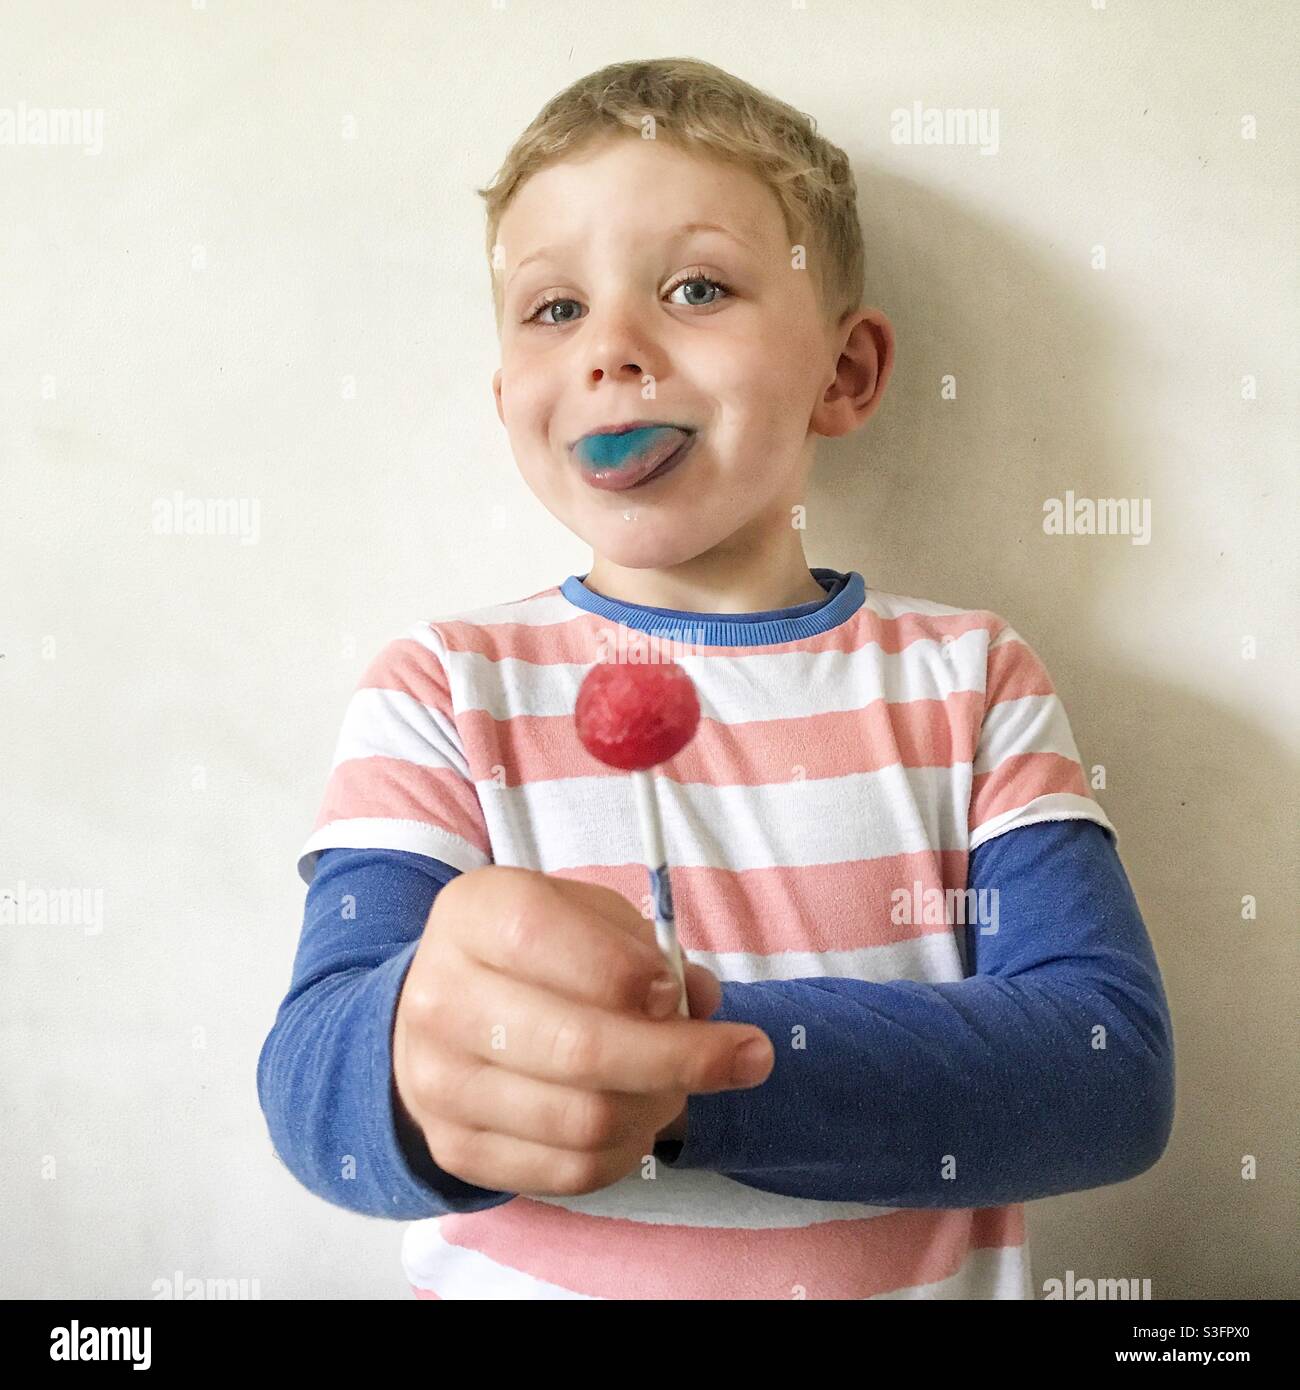 Four year old boy with a red lollipop Stock Photo